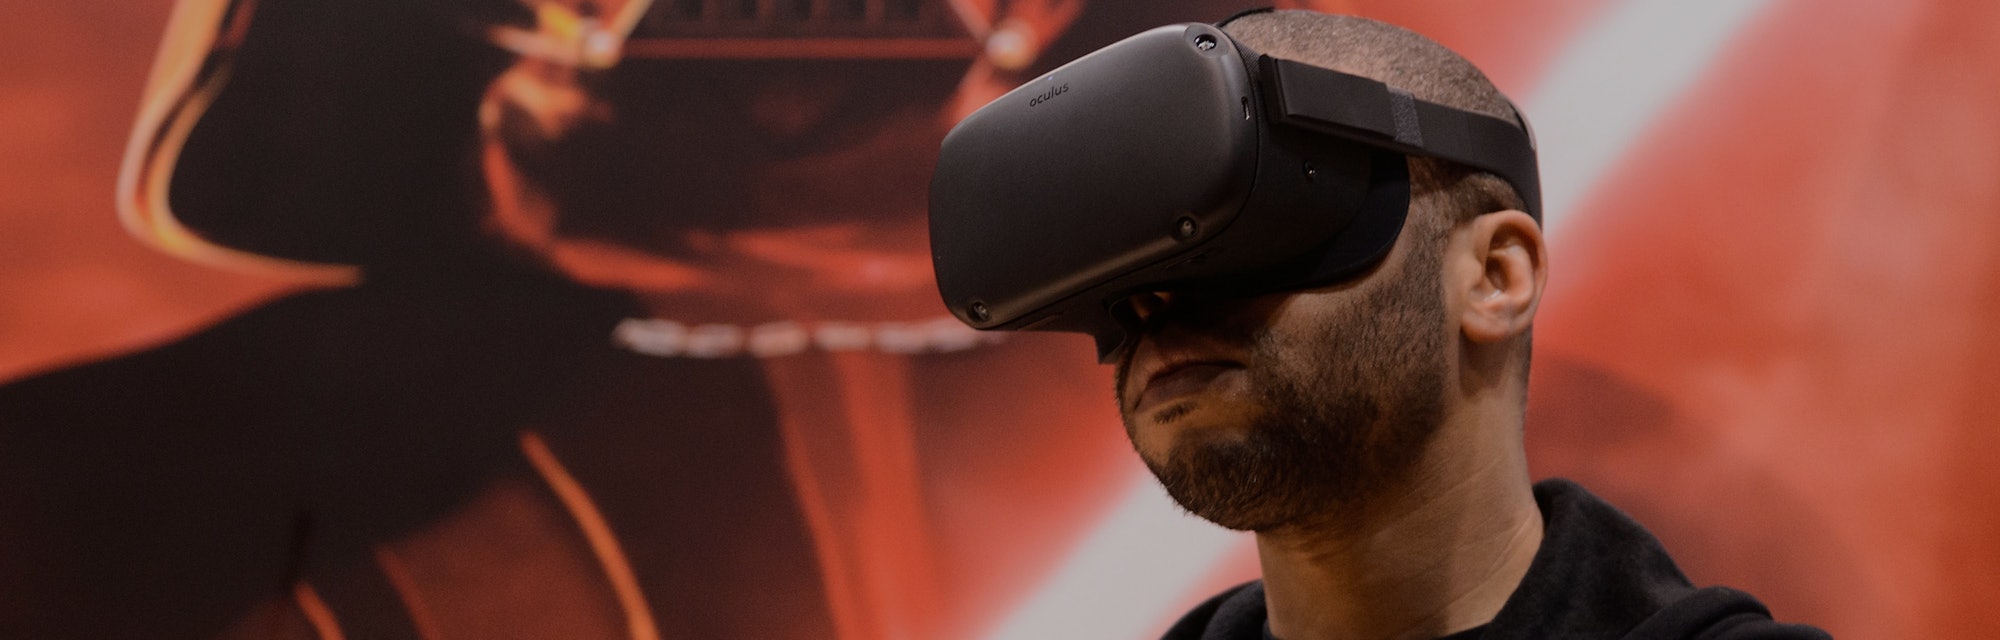 CHICAGO, IL - APRIL 15:  An attendee plays the 'Vader Immortal: A Star Wars VR Series" experience on...